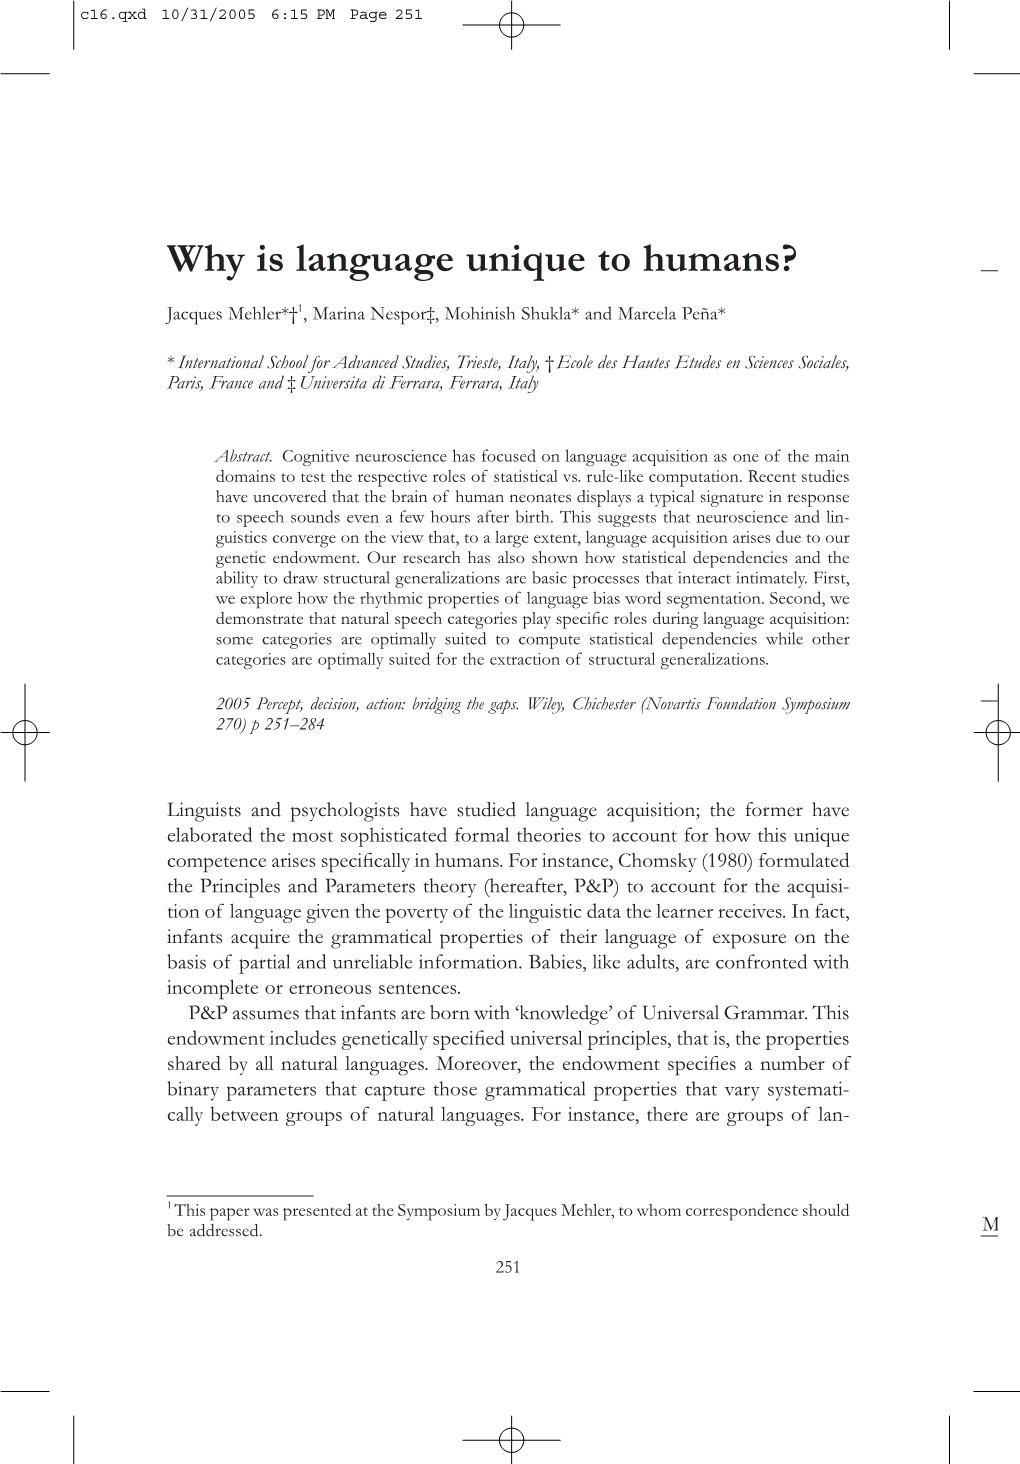 Why Is Language Unique to Humans?